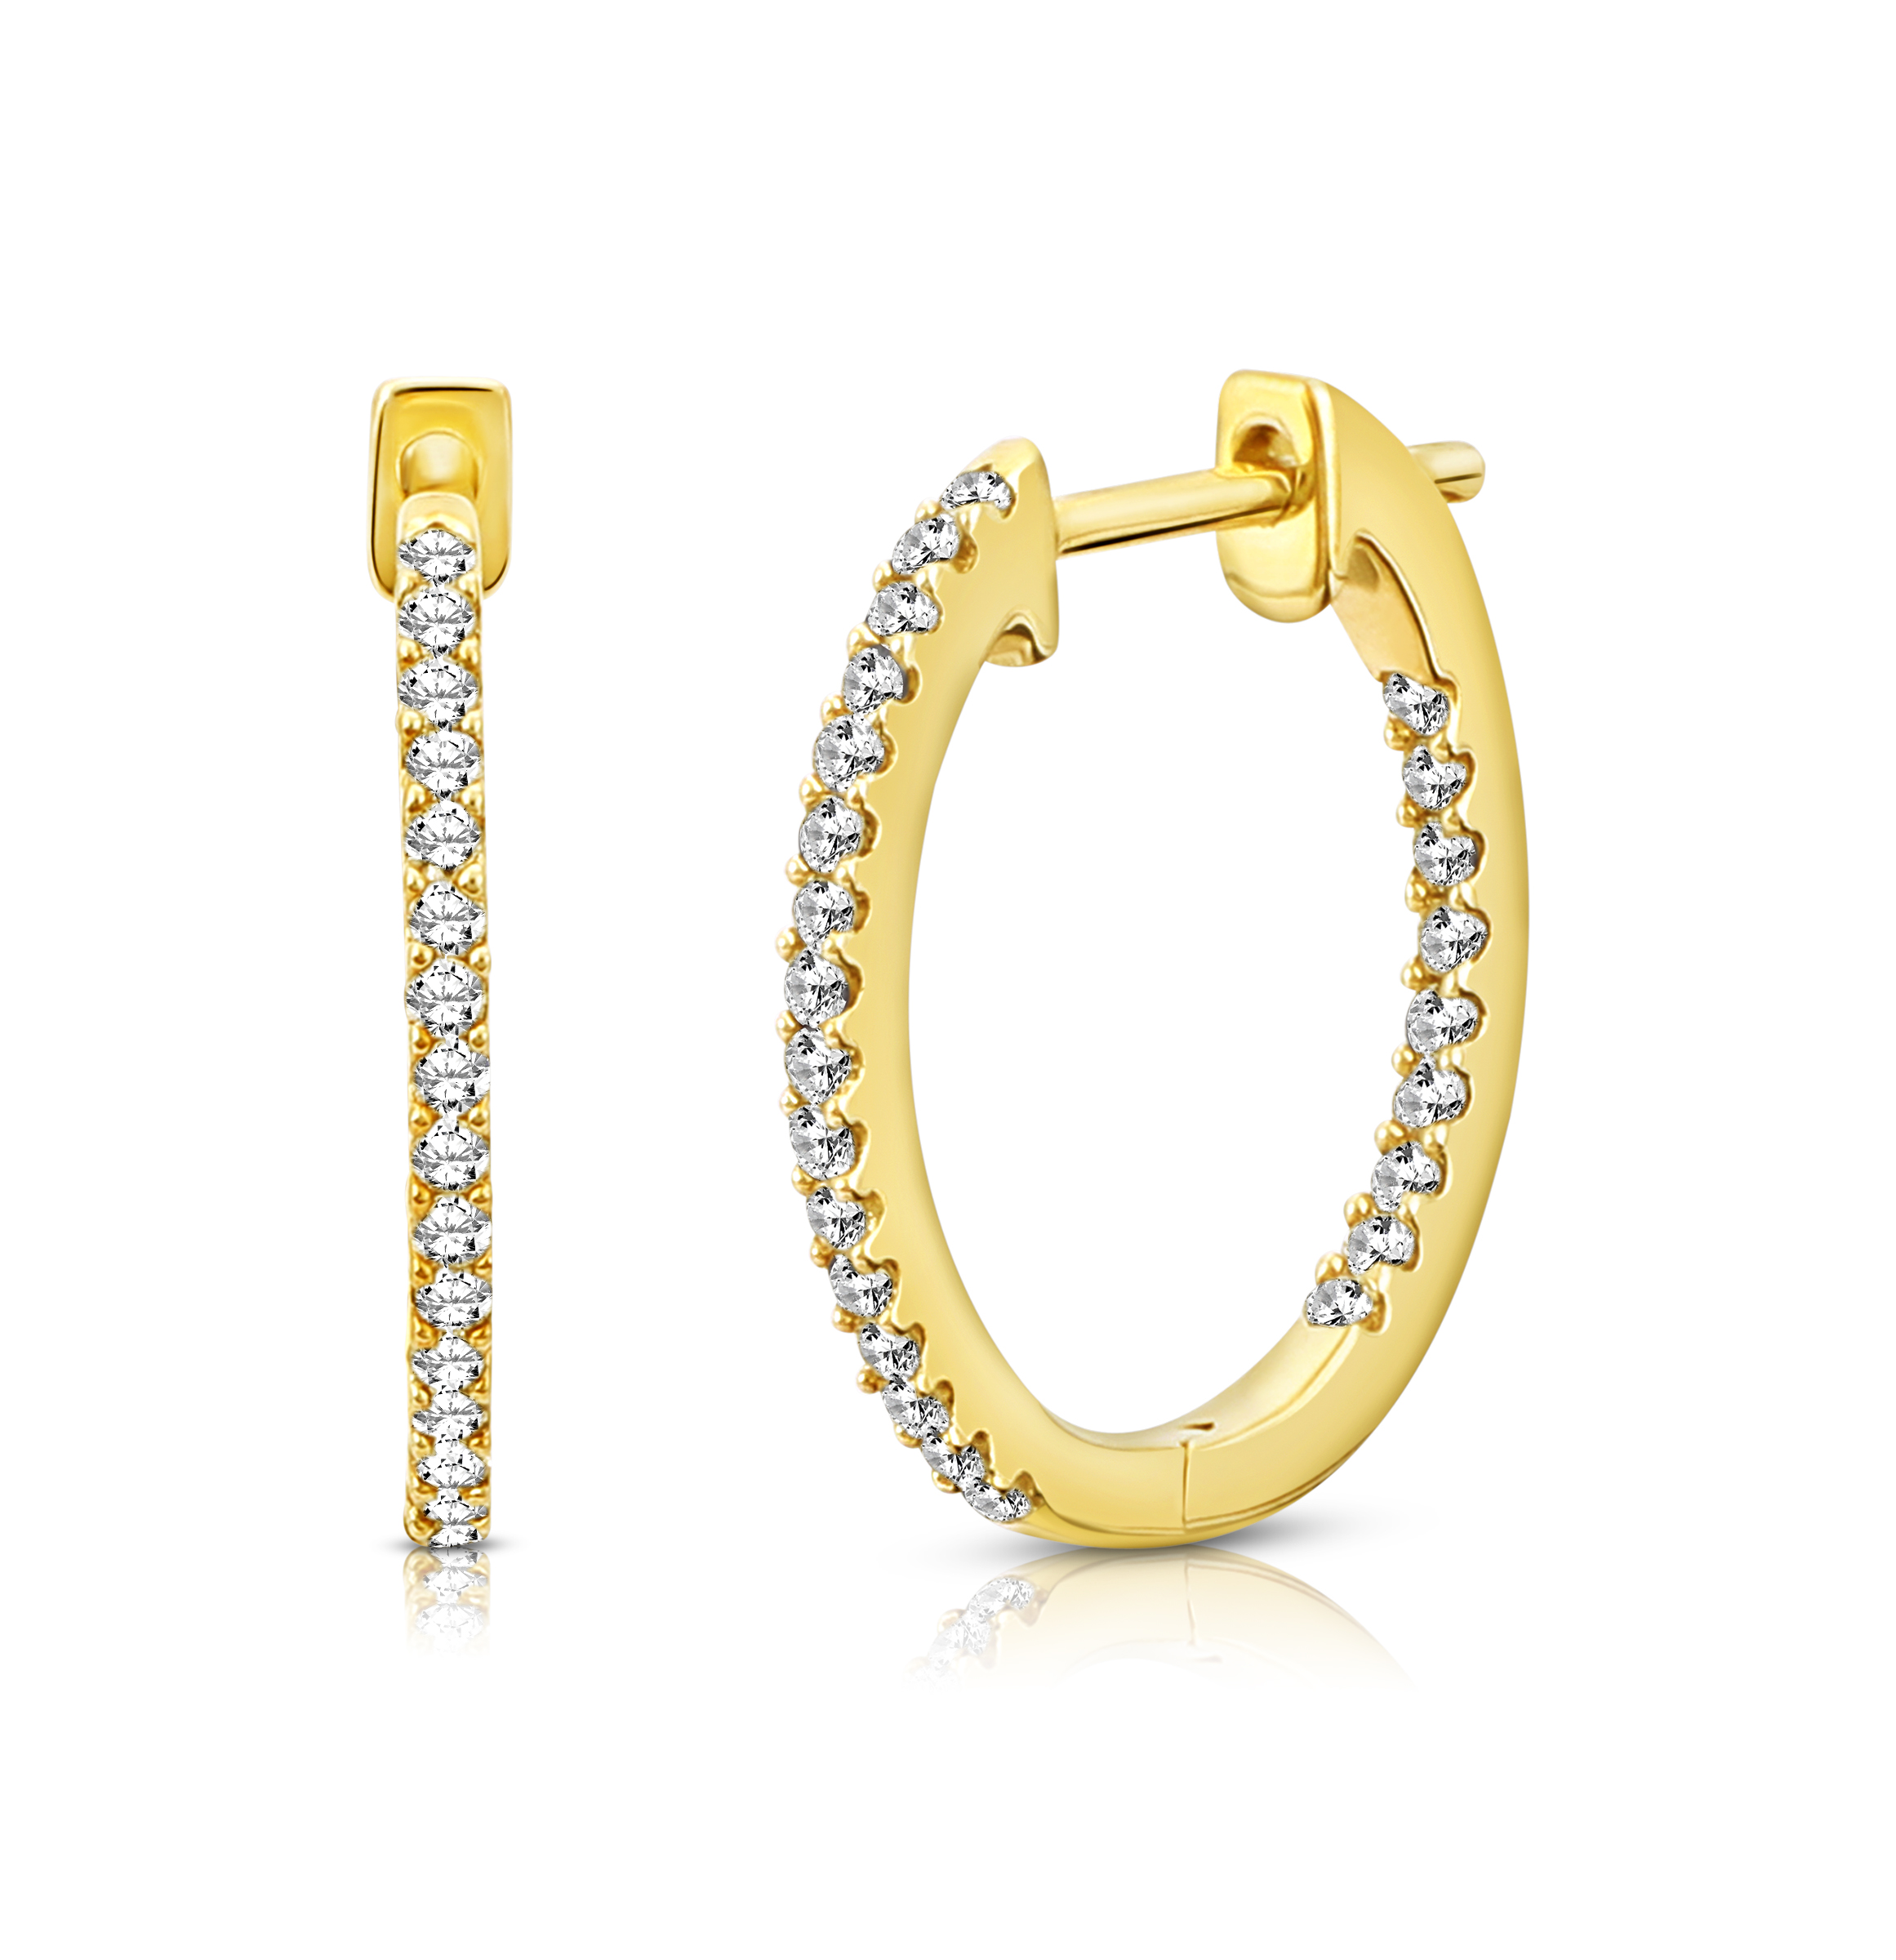 Diamond2Deal 10K Yellow Gold Inside and Outside Diamond Hoop Earrings (1/3 cttw, I-J Color, I2 Clarity)